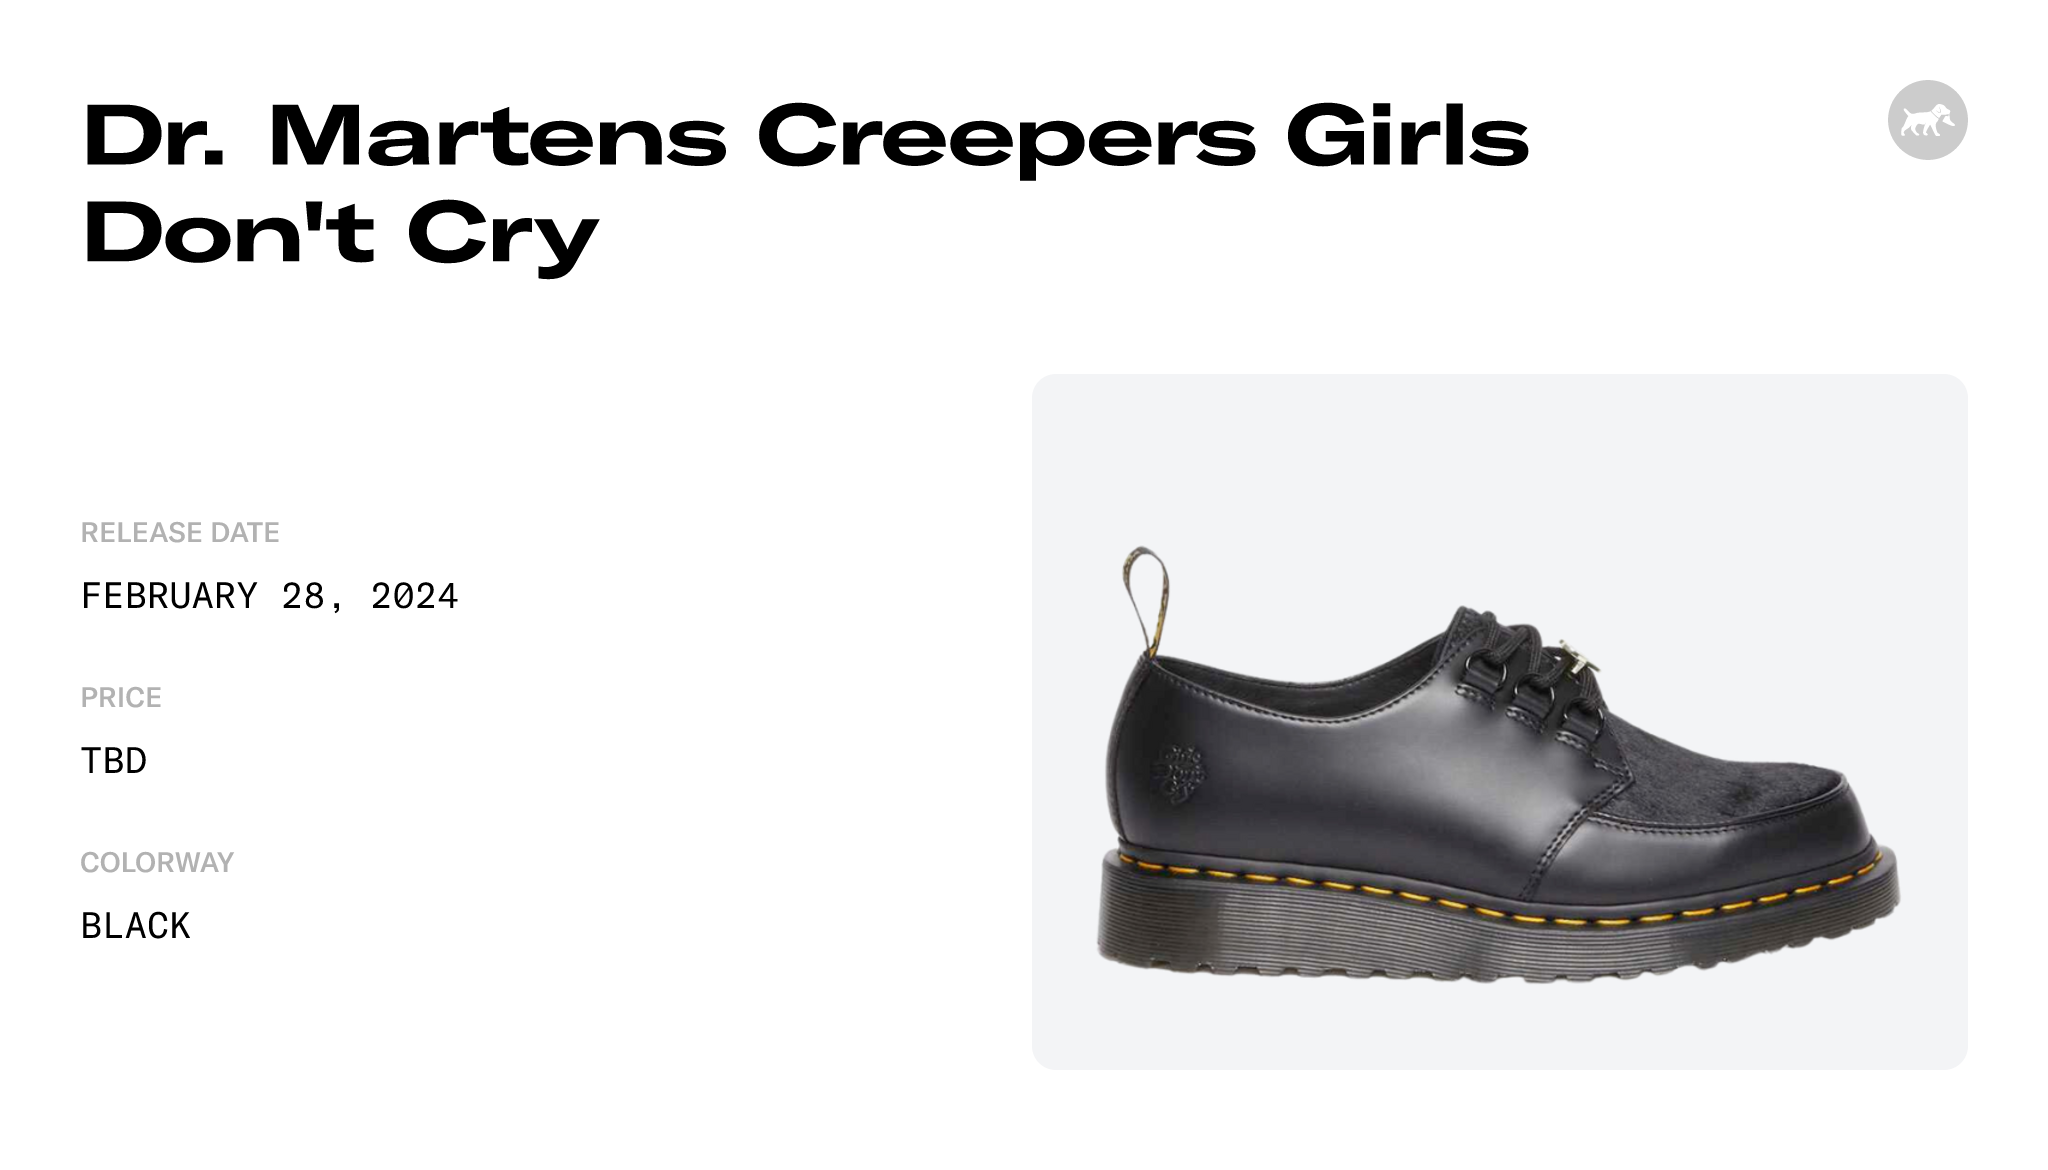 Dr. Martens Creepers Girls Don't Cry Raffles and Release Date